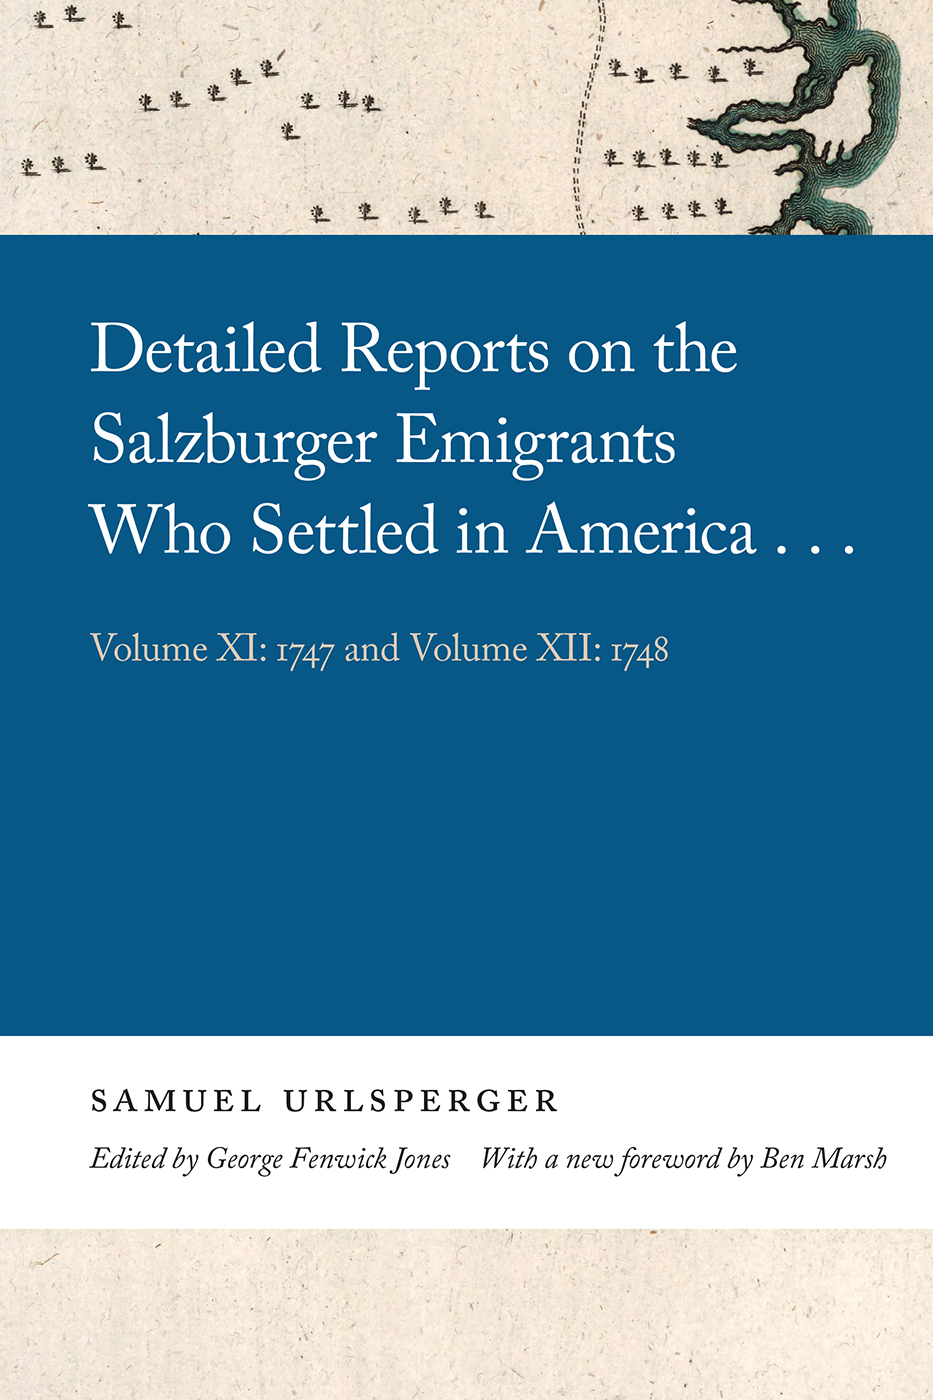 Cover of, Detailed reports on the Salzburger emigrants who settled in America, volume 11 : 1747 and volume 12 : 1748.